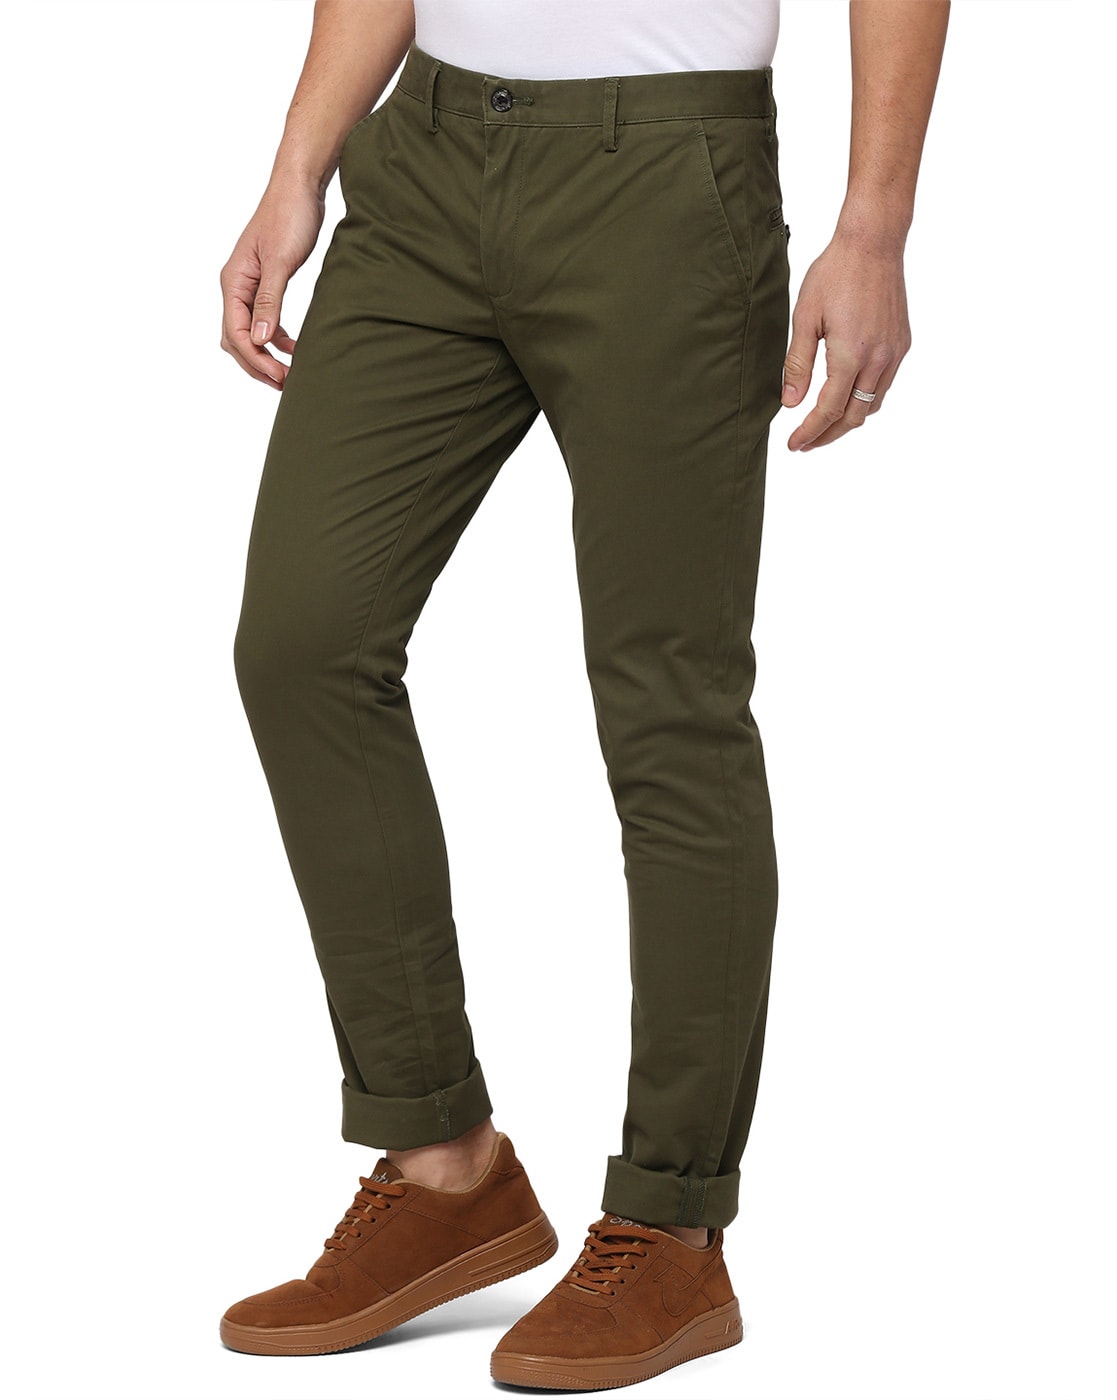 Burnt Umber Caramel Khaki Slim Fit Trouser, Size-32 - (M000134) in  Hyderabad at best price by Jade Blue Lifestyle INDIA Ltd - Justdial